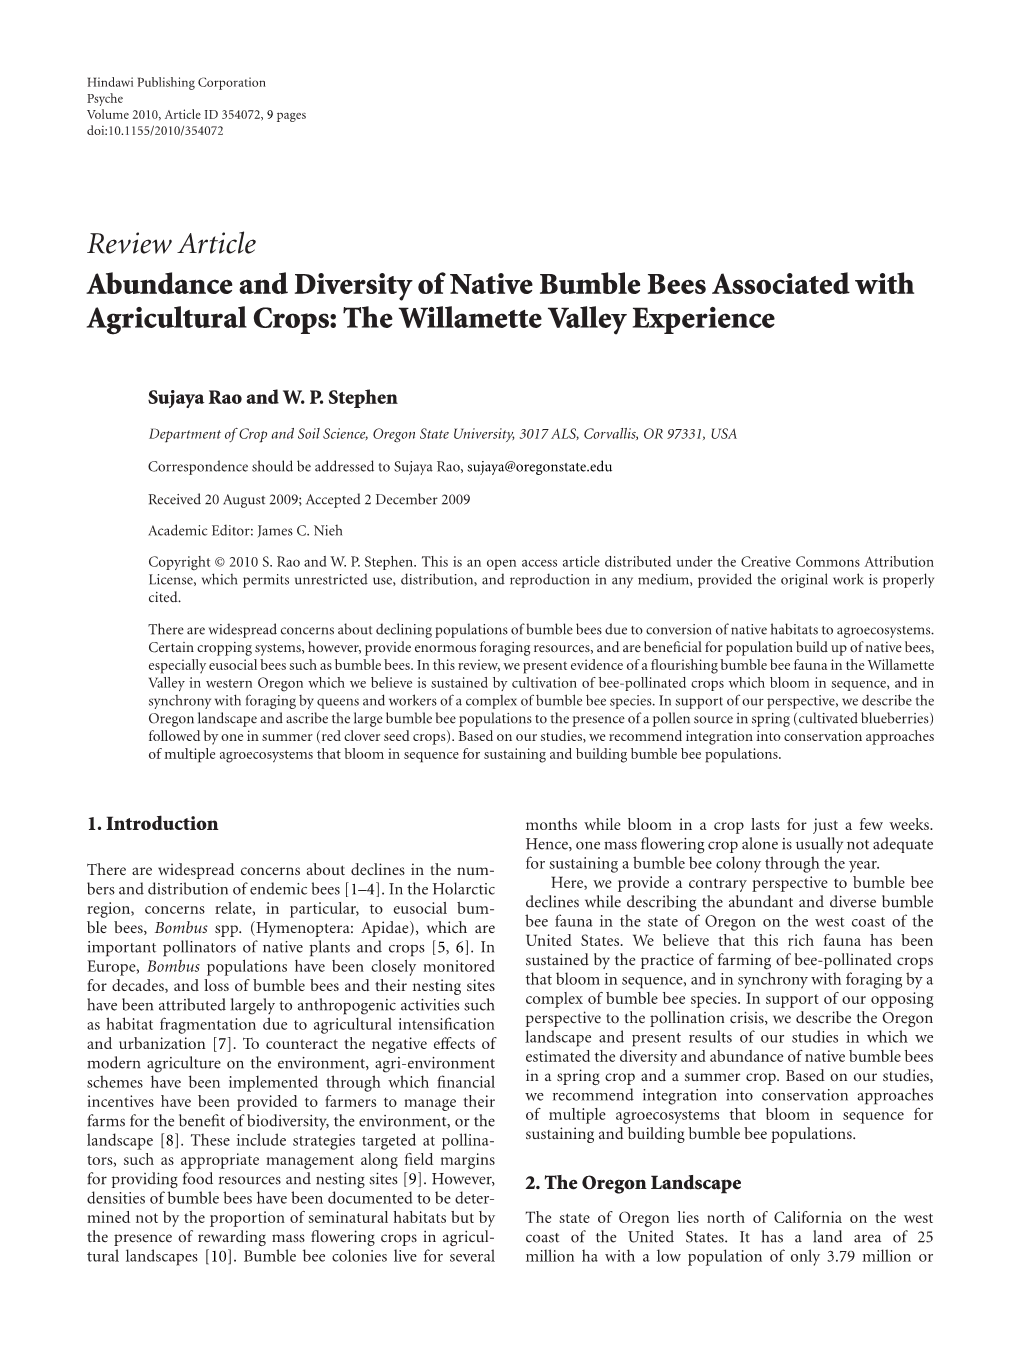 Abundance and Diversity of Native Bumble Bees Associated with Agricultural Crops: the Willamette Valley Experience